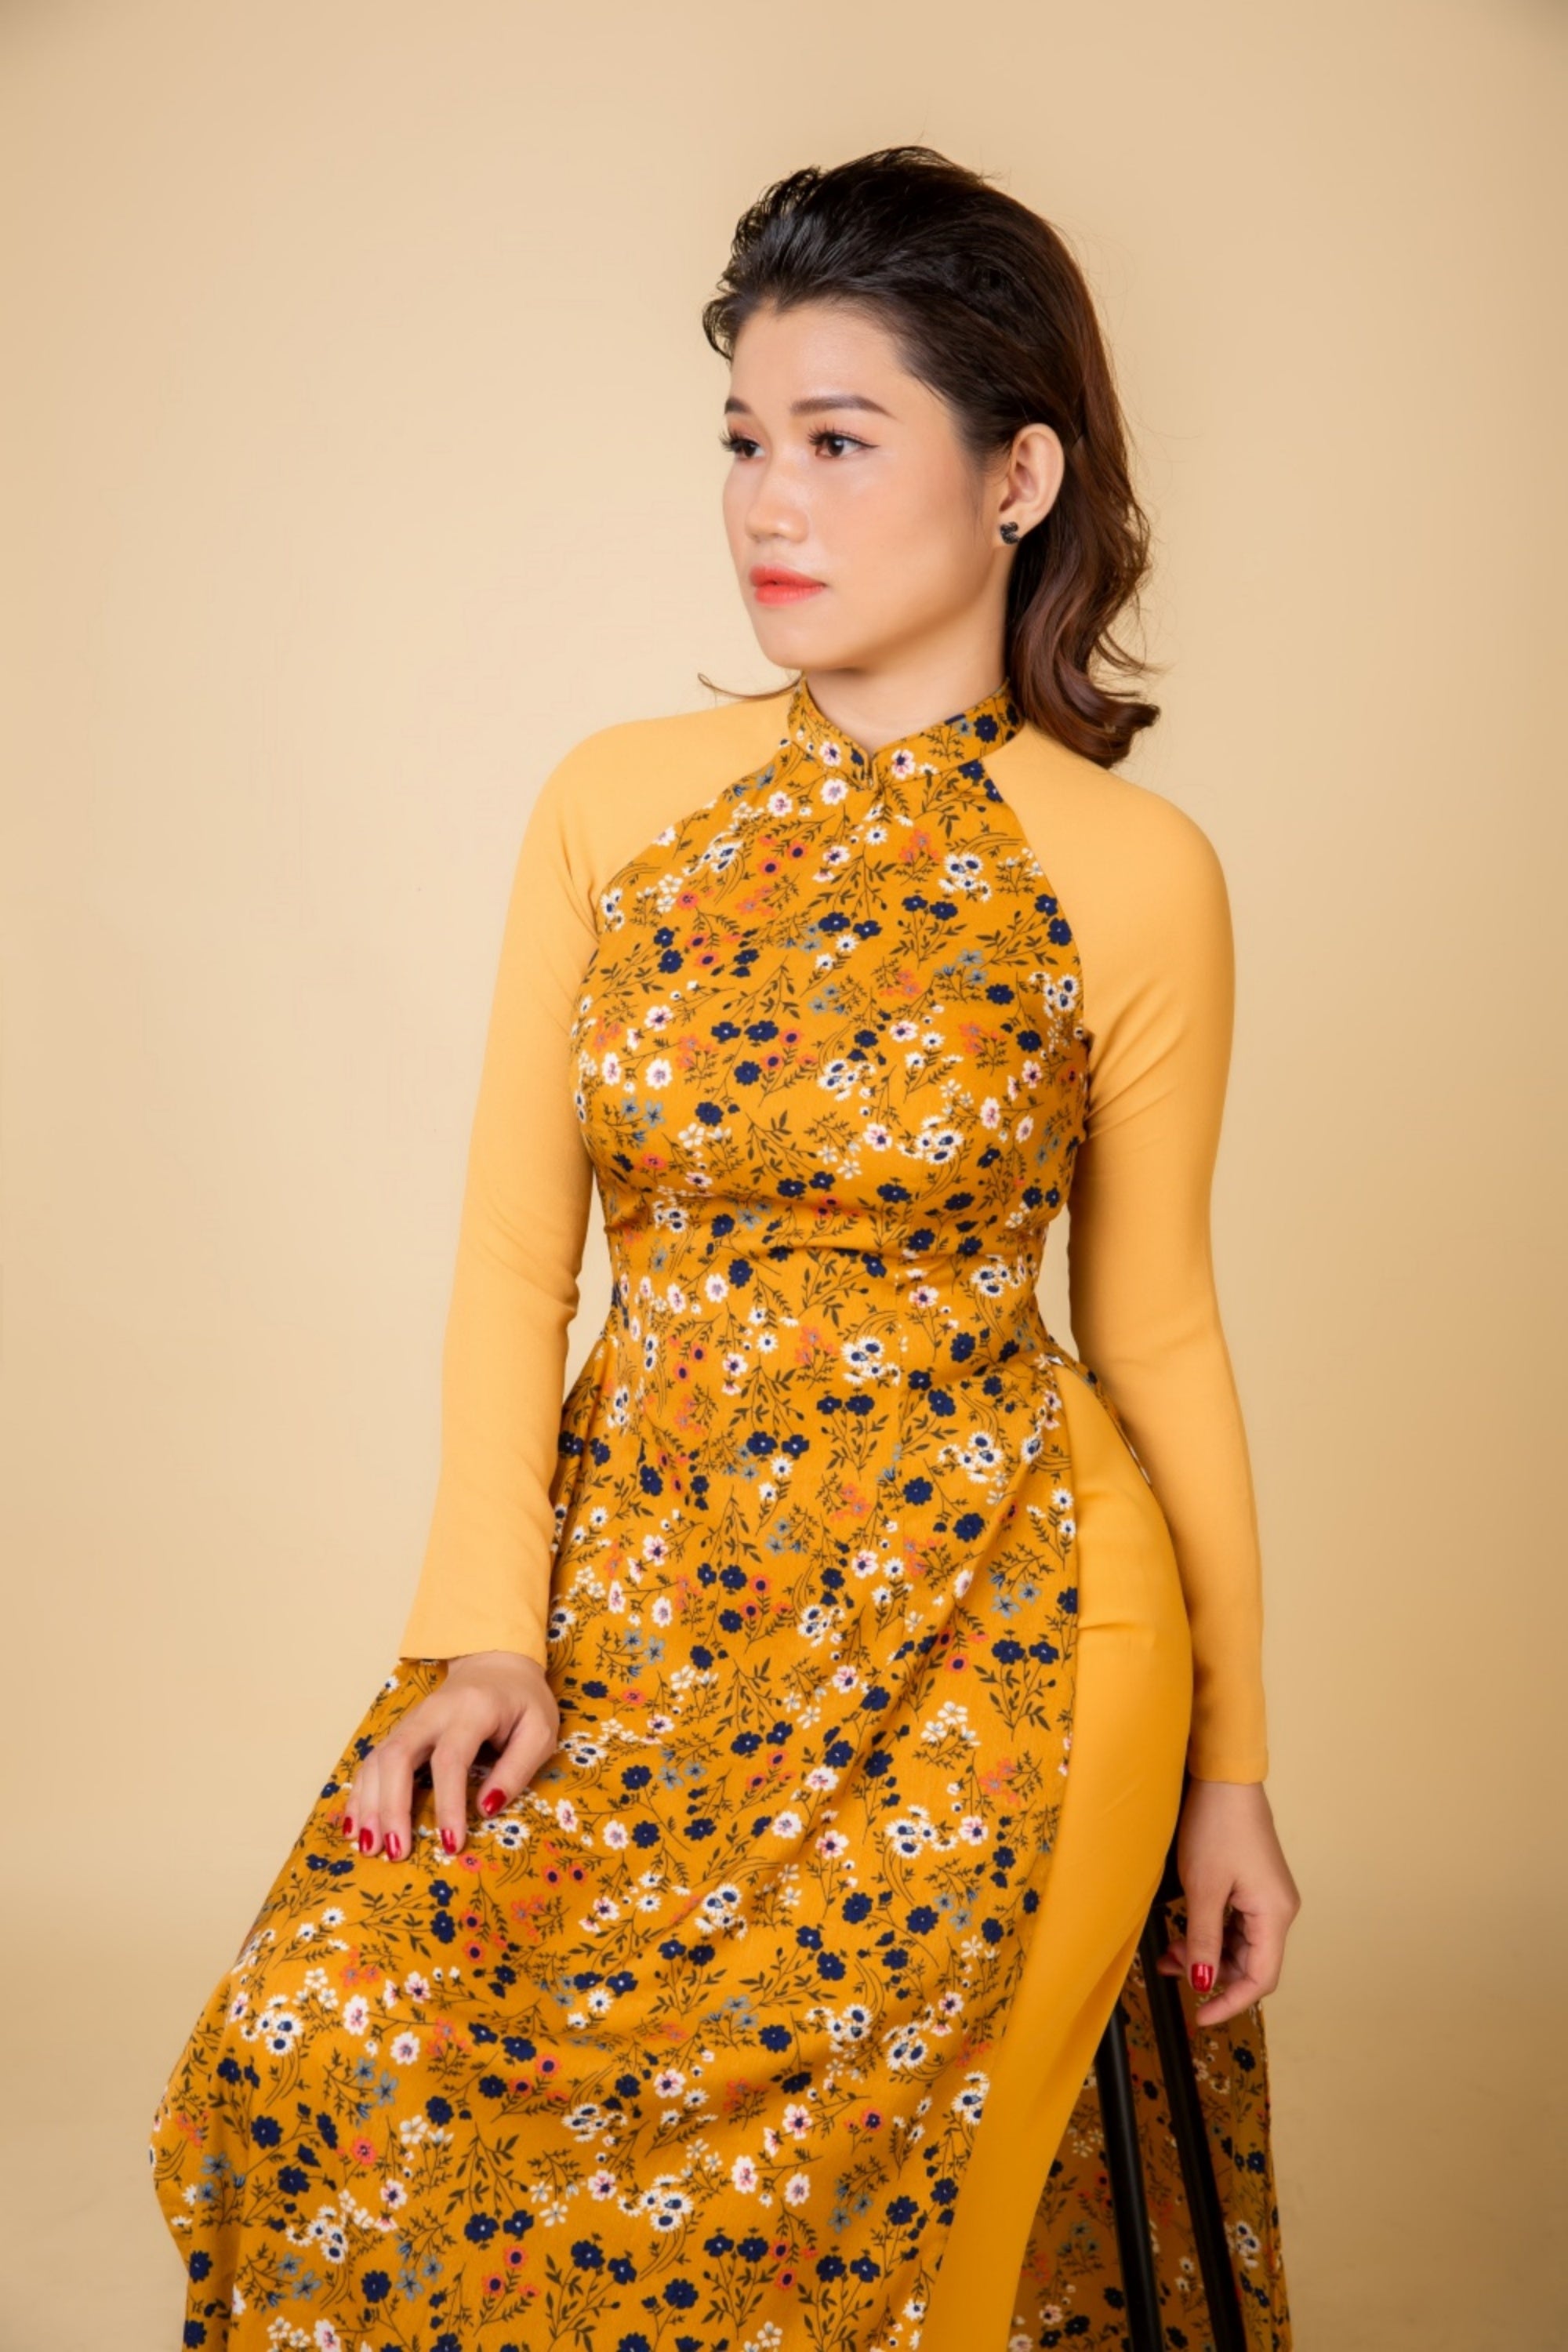 Ao dai dress with pants. Floral pattern silk stretch fabric.